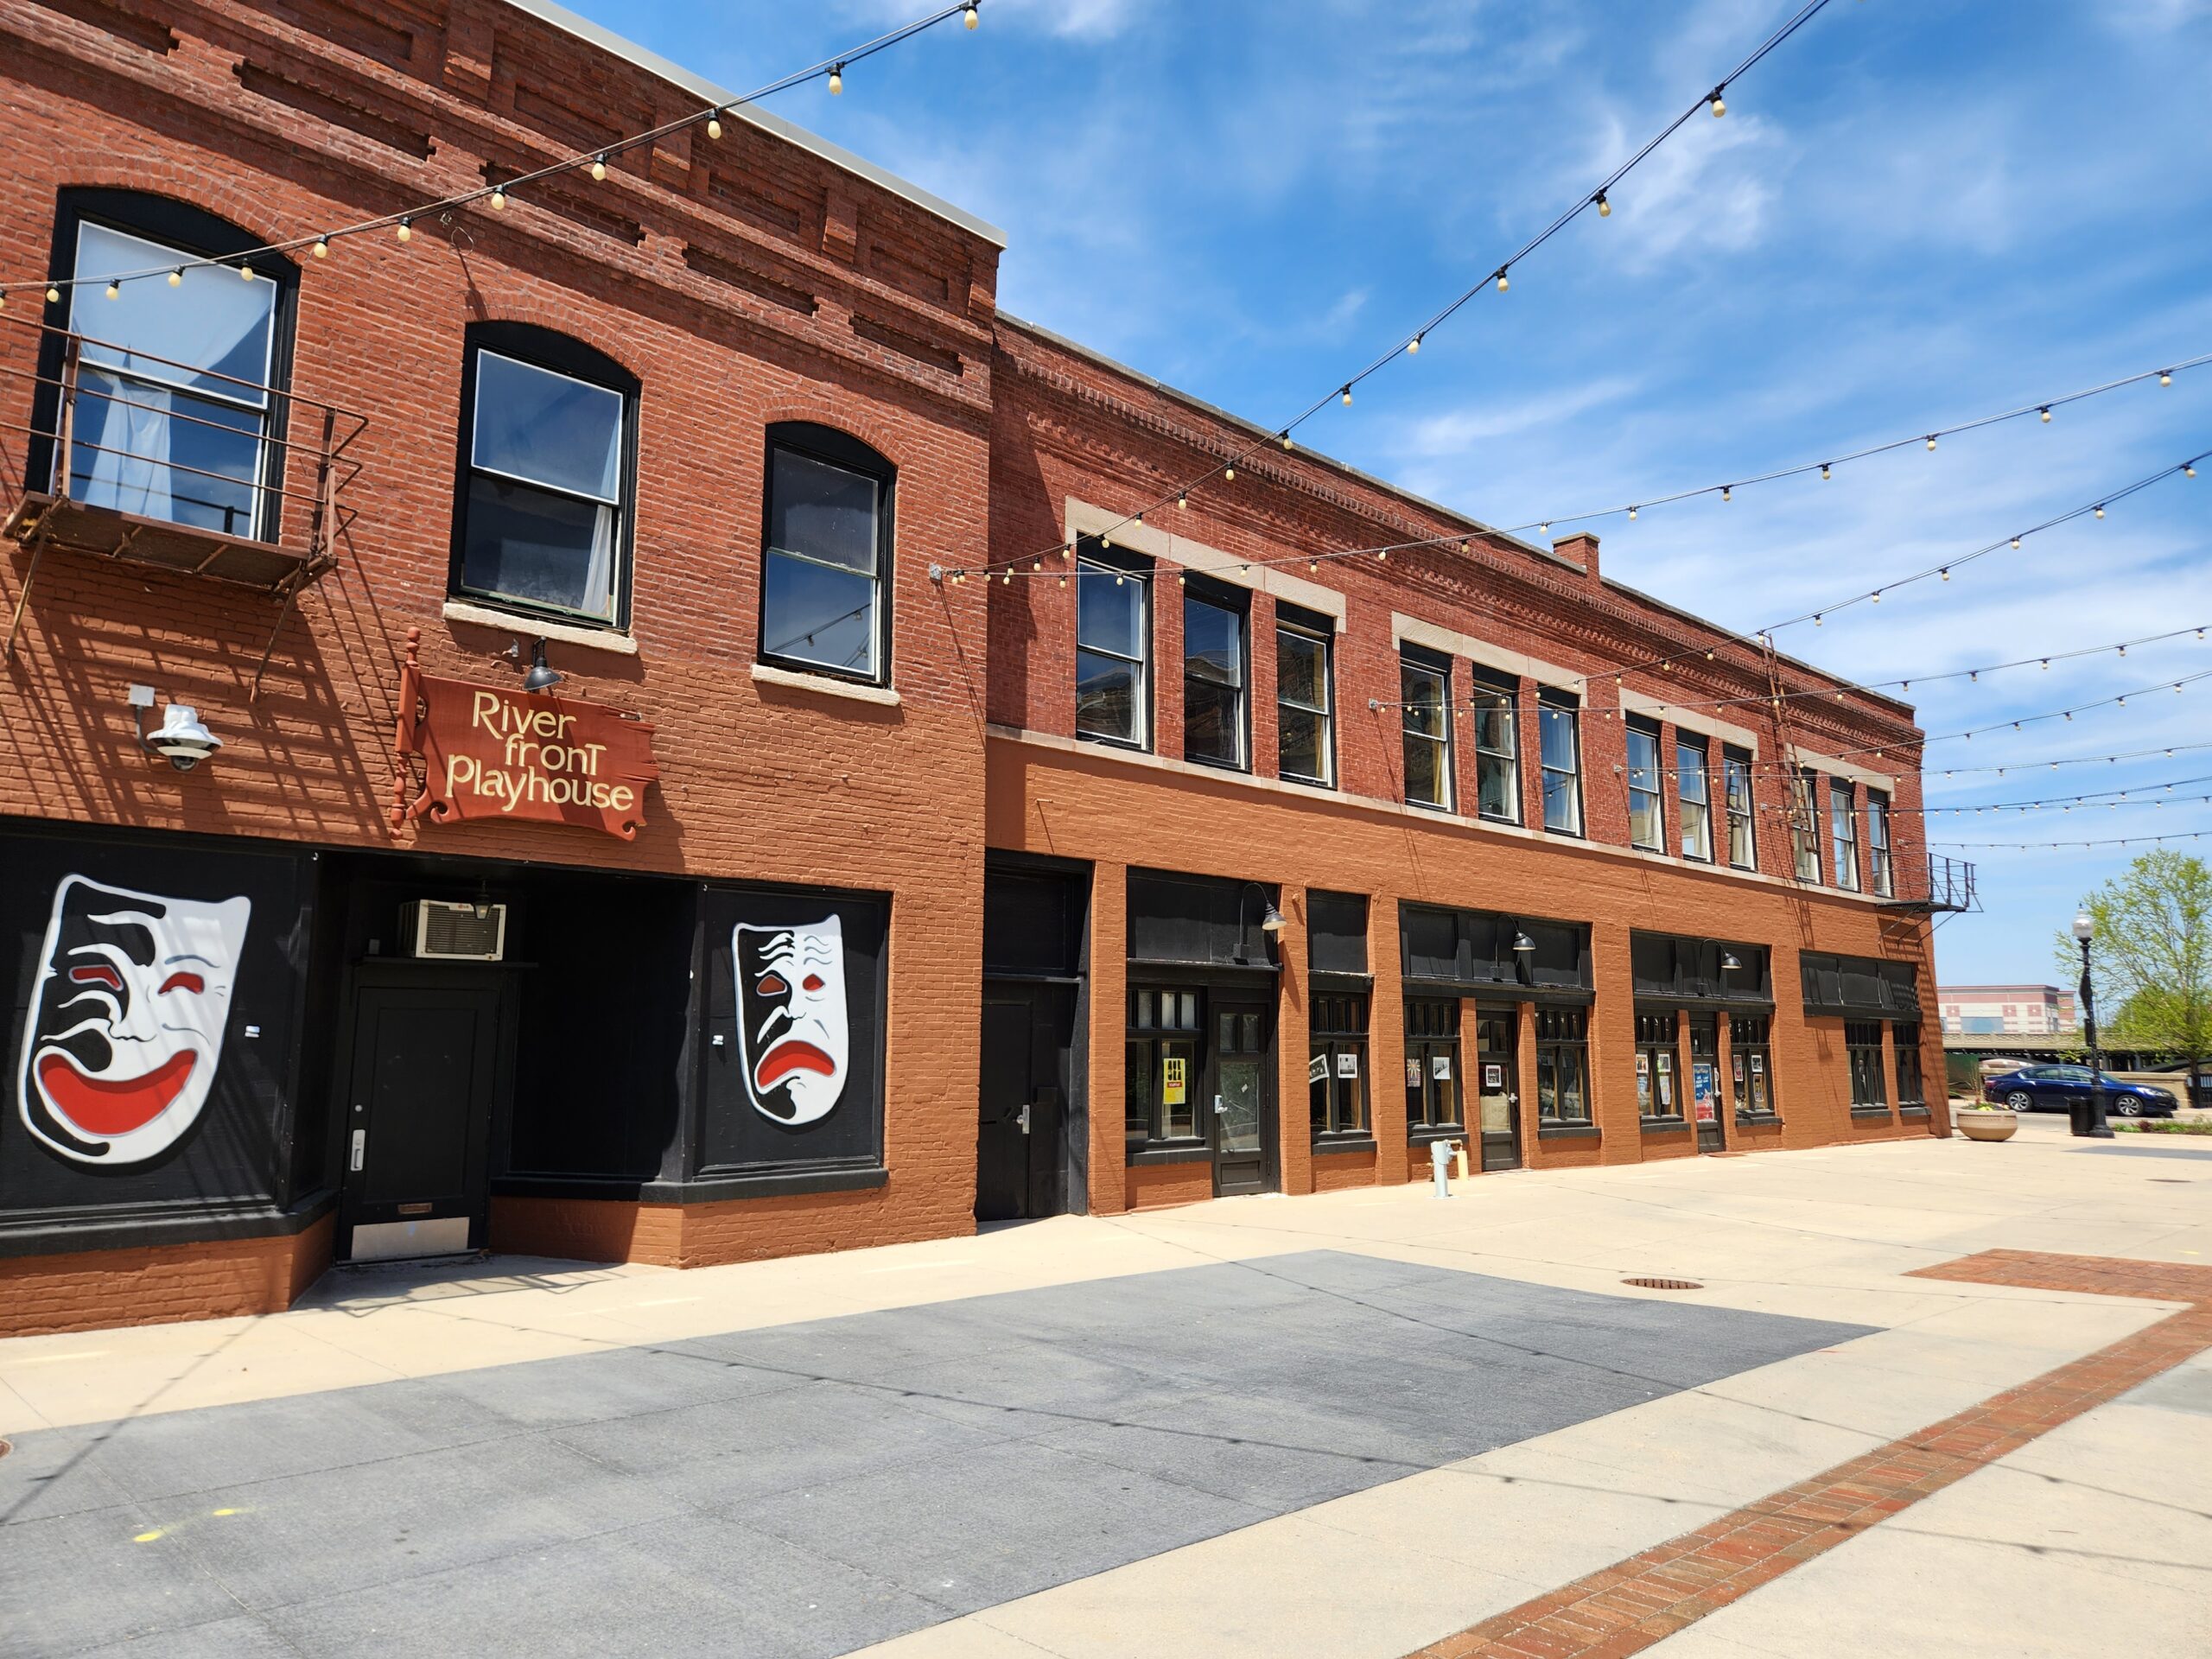 43 Galena as a plain brick building on the plaza with bistro lights above. Next door to the building is a theatre.